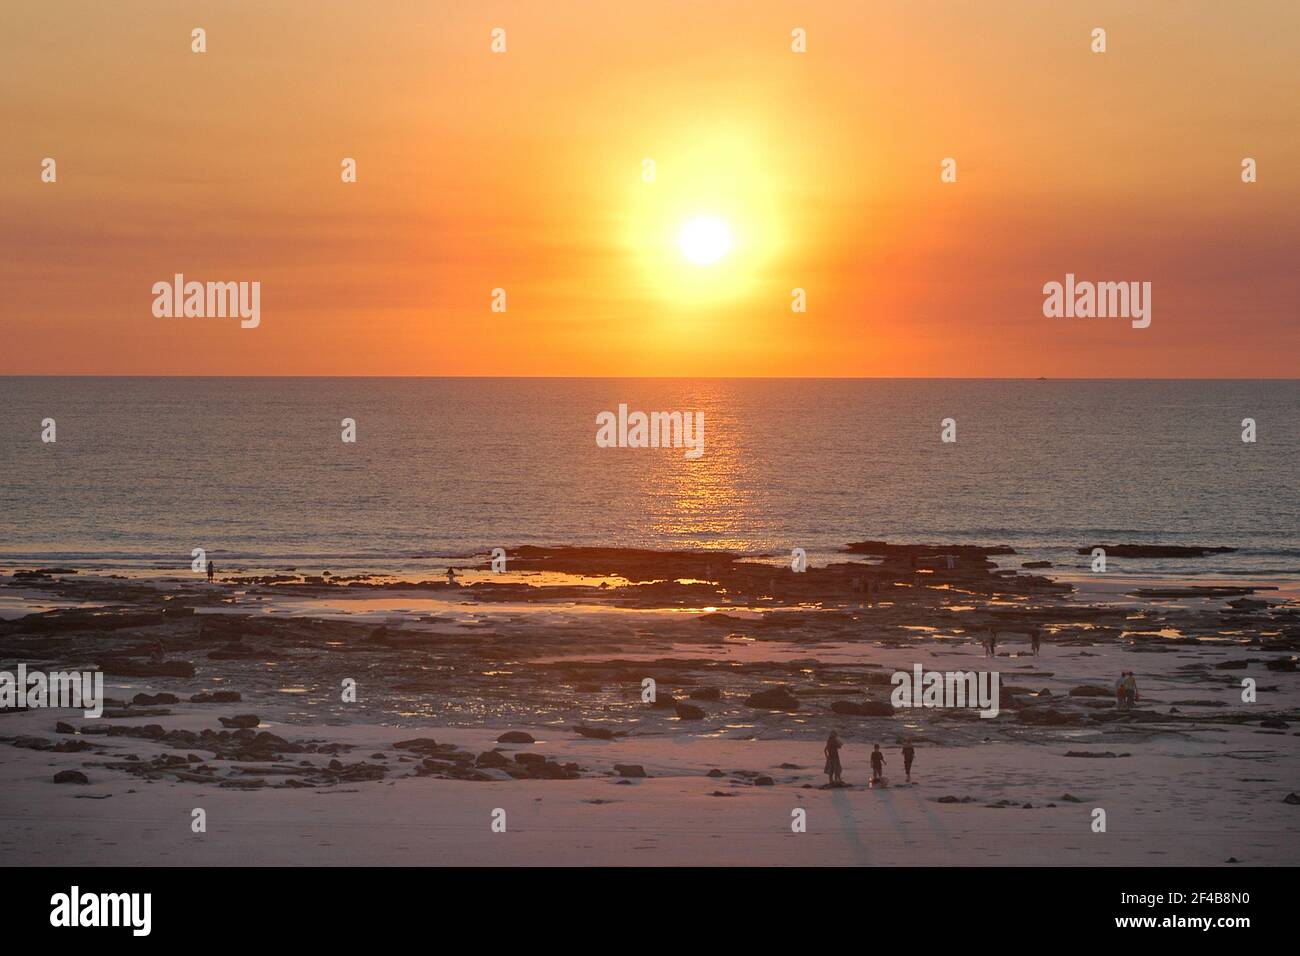 Broome is a coastal, pearling and tourist town in the Kimberley region of Western Australia. Photo shows Cable Beach at Sunset and low tide. Stock Photo